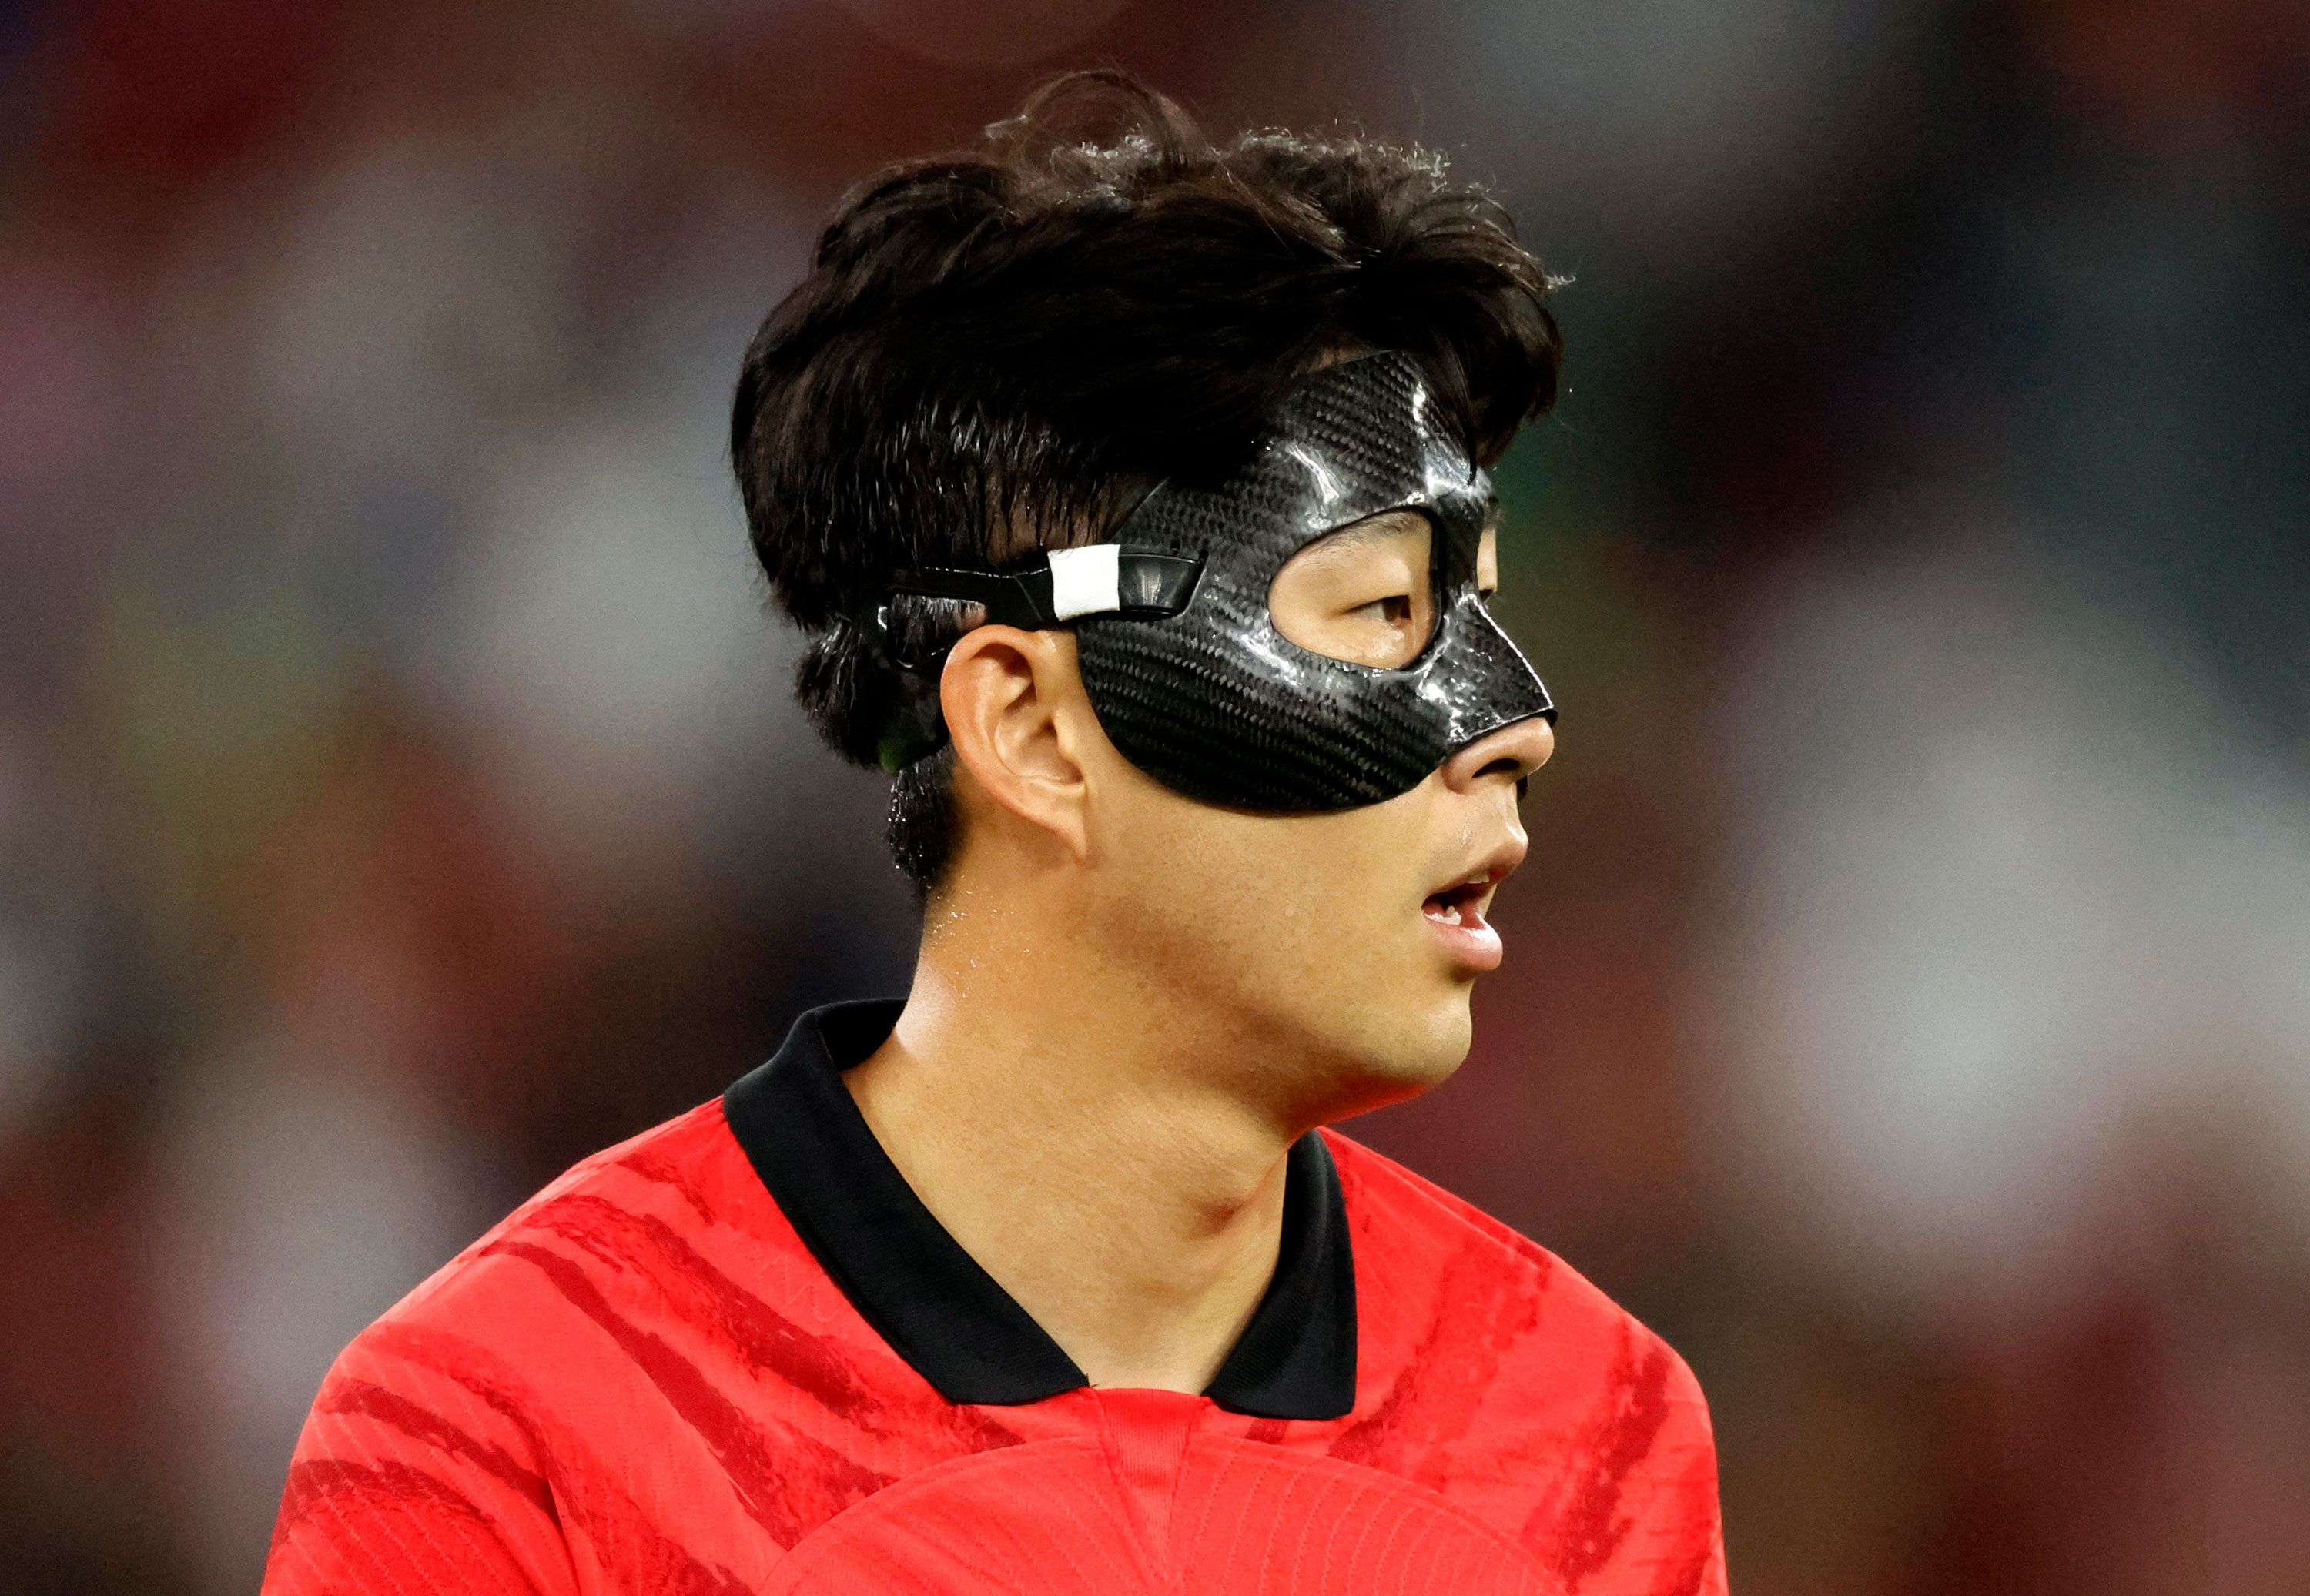 Here’s why you’re seeing players wear masks in the World Cup